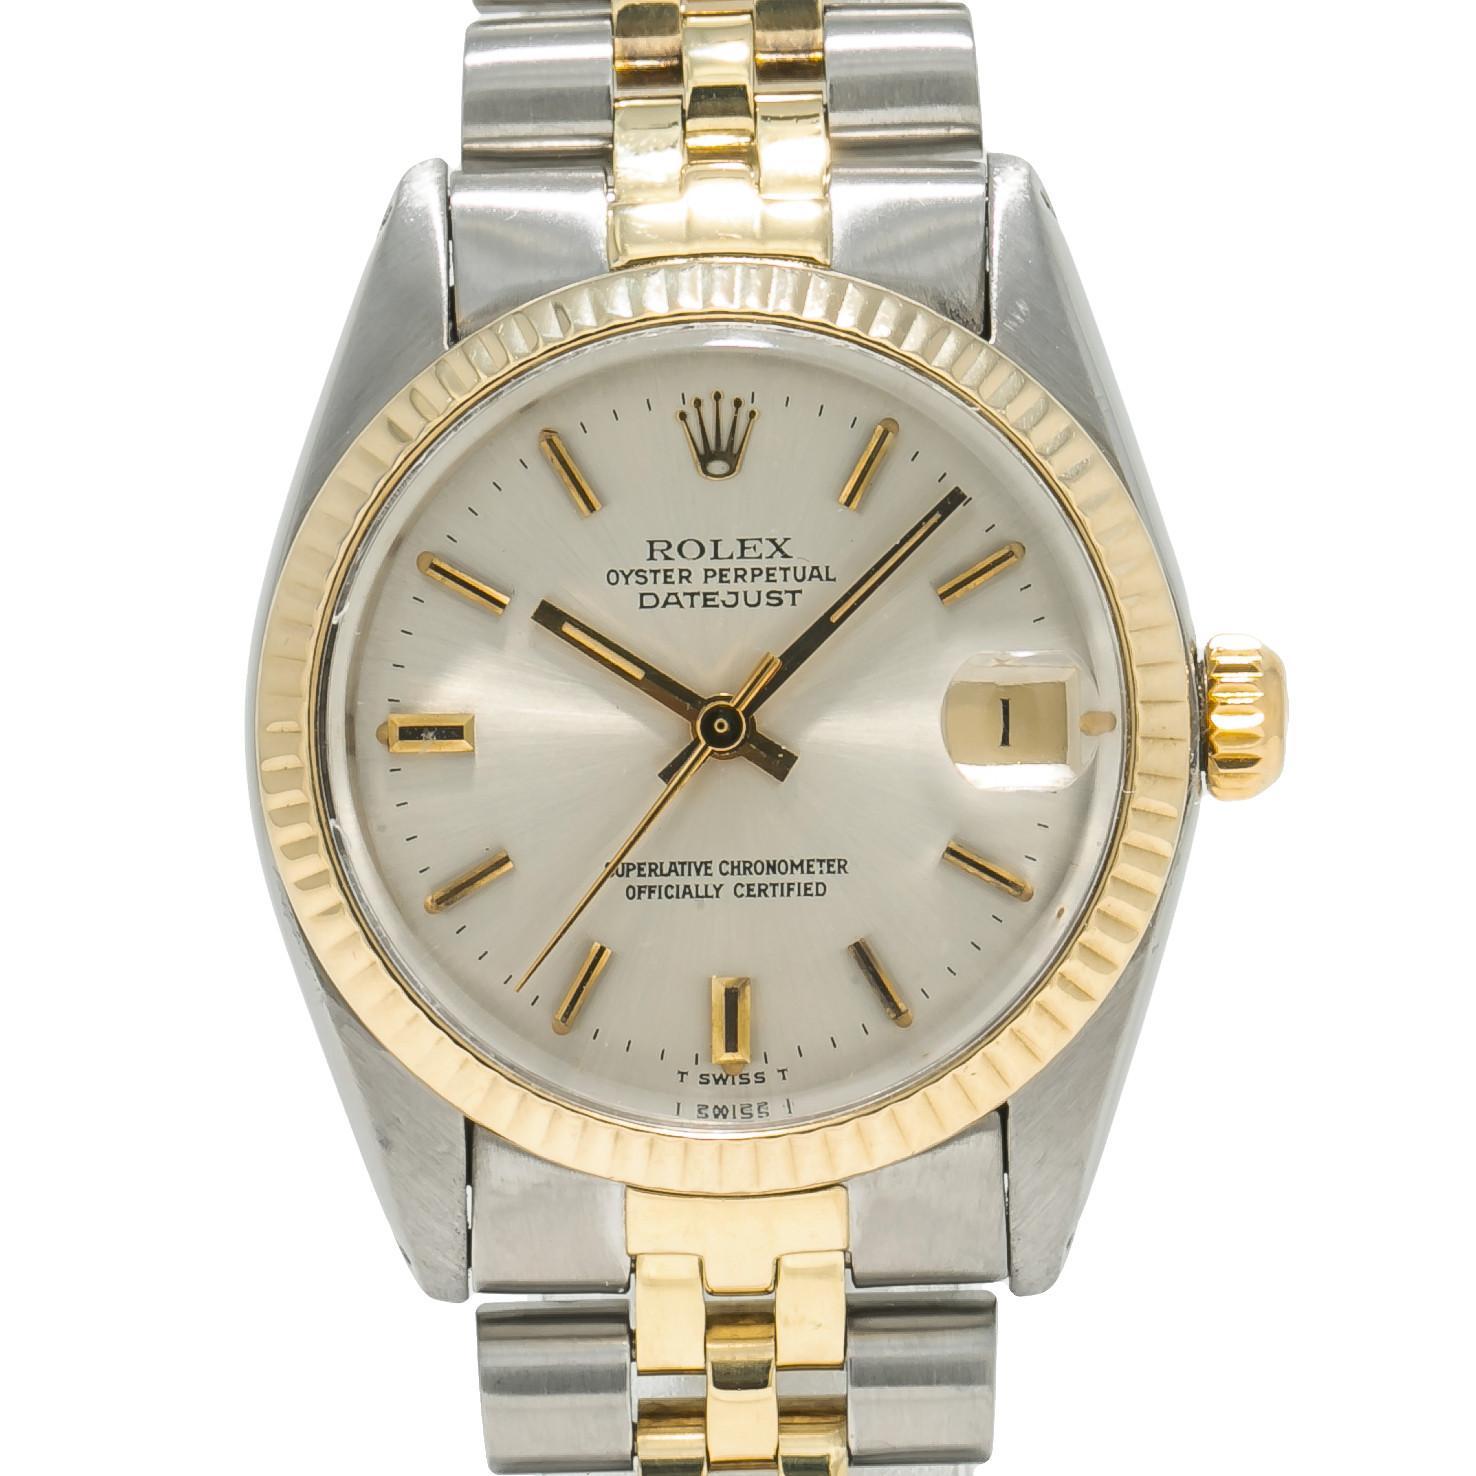 Contemporary Rolex Datejust 6827, Silver Dial, Certified and Warranty